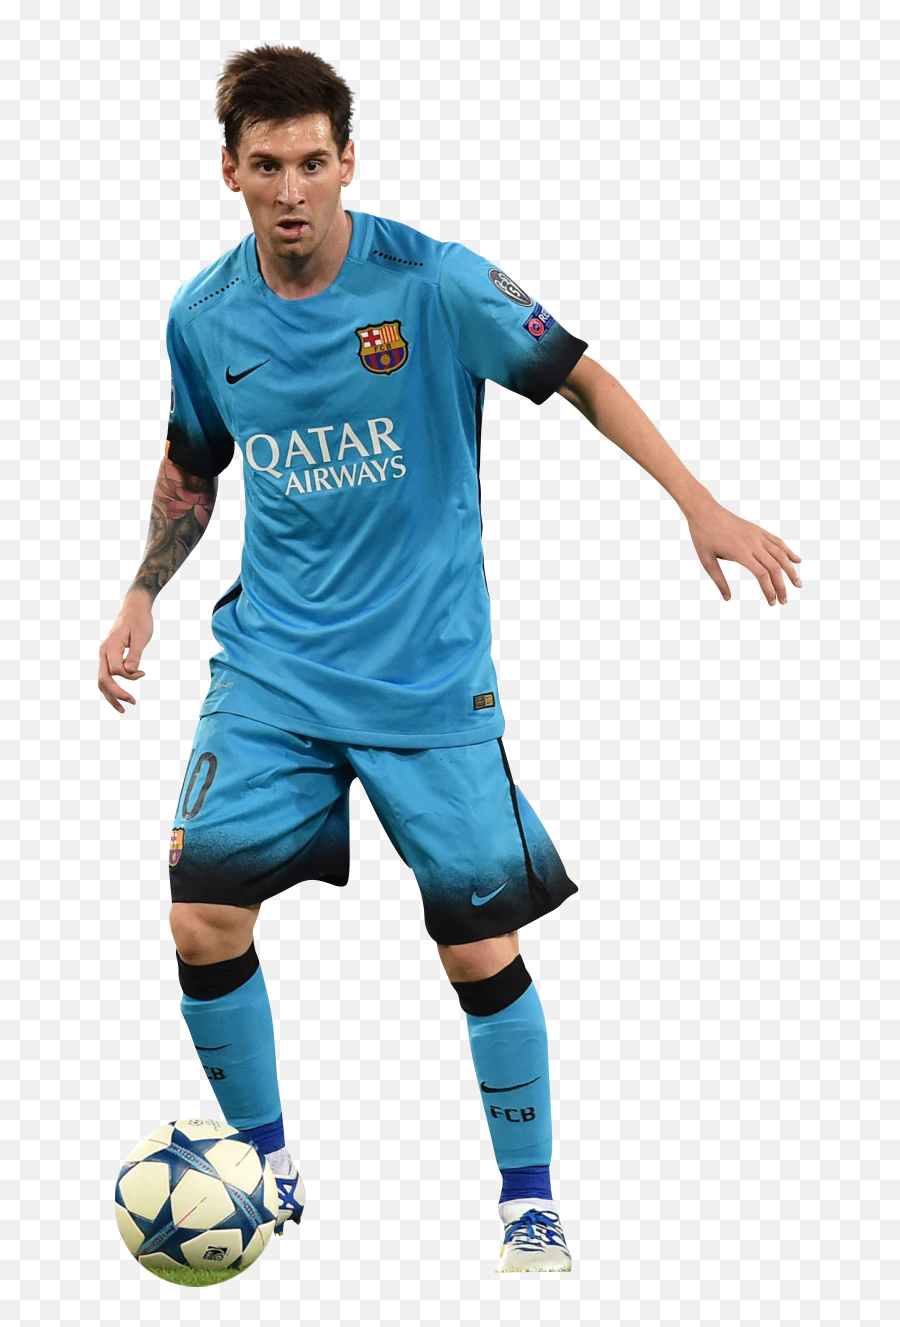 Lionel Messi Render - Lionel Messi 2015 16 Png Full Size Player,Lionel Messi Png